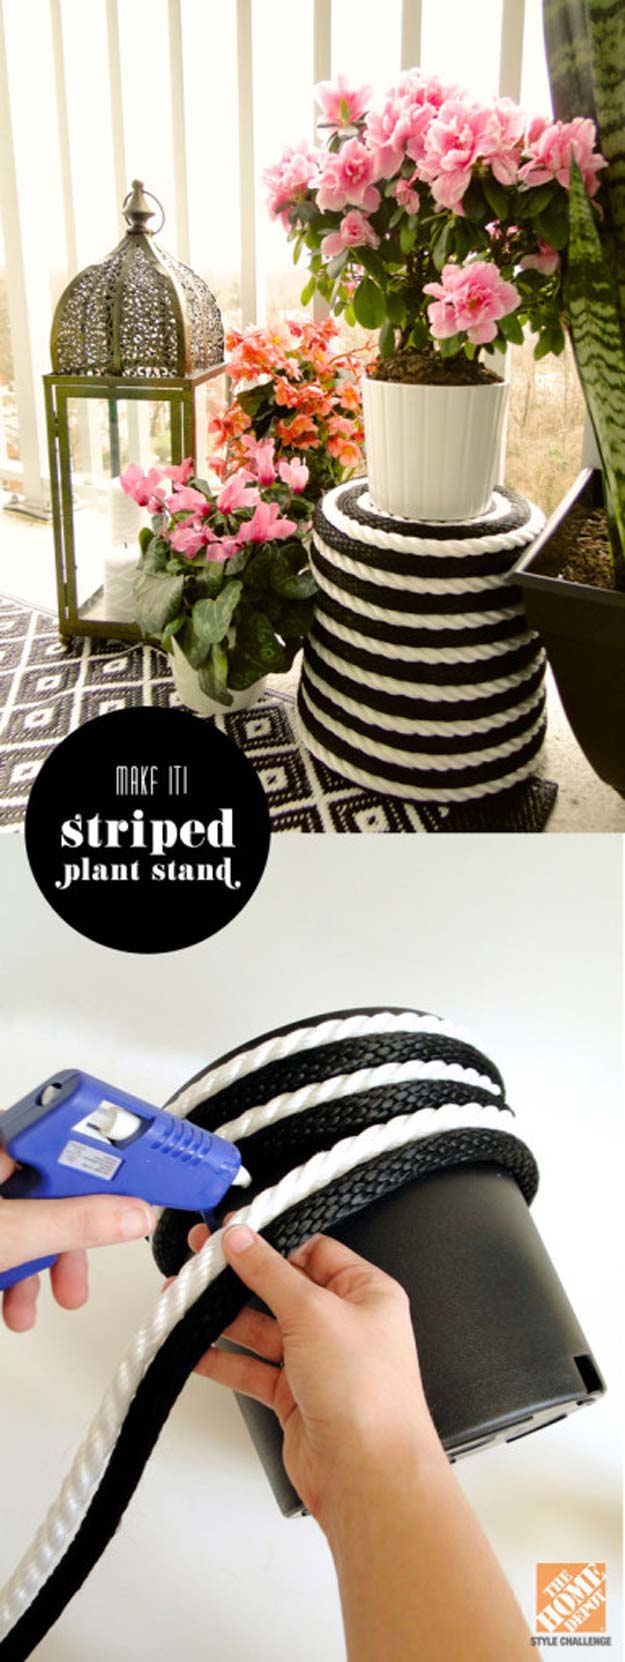 DIY Room Decor Ideas in Black and White - Stripe Plant Stand - Creative Home Decor and Room Accessories - Cheap and Easy Projects and Crafts for Wall Art, Bedding, Pillows, Rugs and Lighting - Fun Ideas and Projects for Teens, Apartments, Adutls and Teenagers 